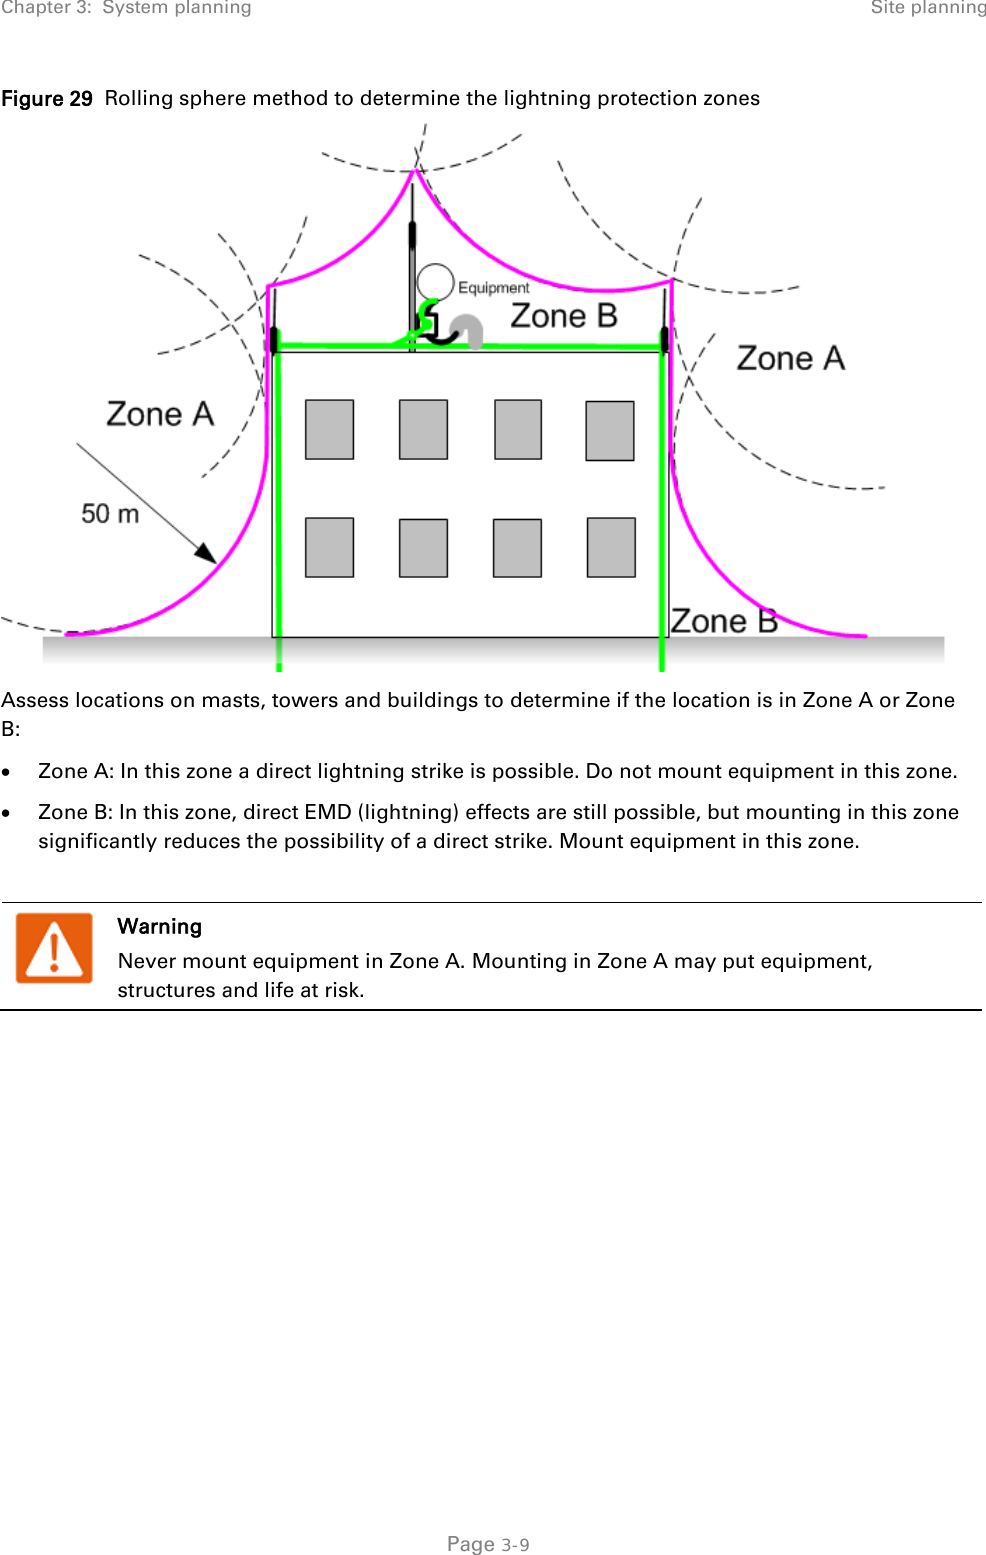 Chapter 3:  System planning Site planning  Figure 29  Rolling sphere method to determine the lightning protection zones  Assess locations on masts, towers and buildings to determine if the location is in Zone A or Zone B: • Zone A: In this zone a direct lightning strike is possible. Do not mount equipment in this zone. • Zone B: In this zone, direct EMD (lightning) effects are still possible, but mounting in this zone significantly reduces the possibility of a direct strike. Mount equipment in this zone.   Warning Never mount equipment in Zone A. Mounting in Zone A may put equipment, structures and life at risk.   Page 3-9 